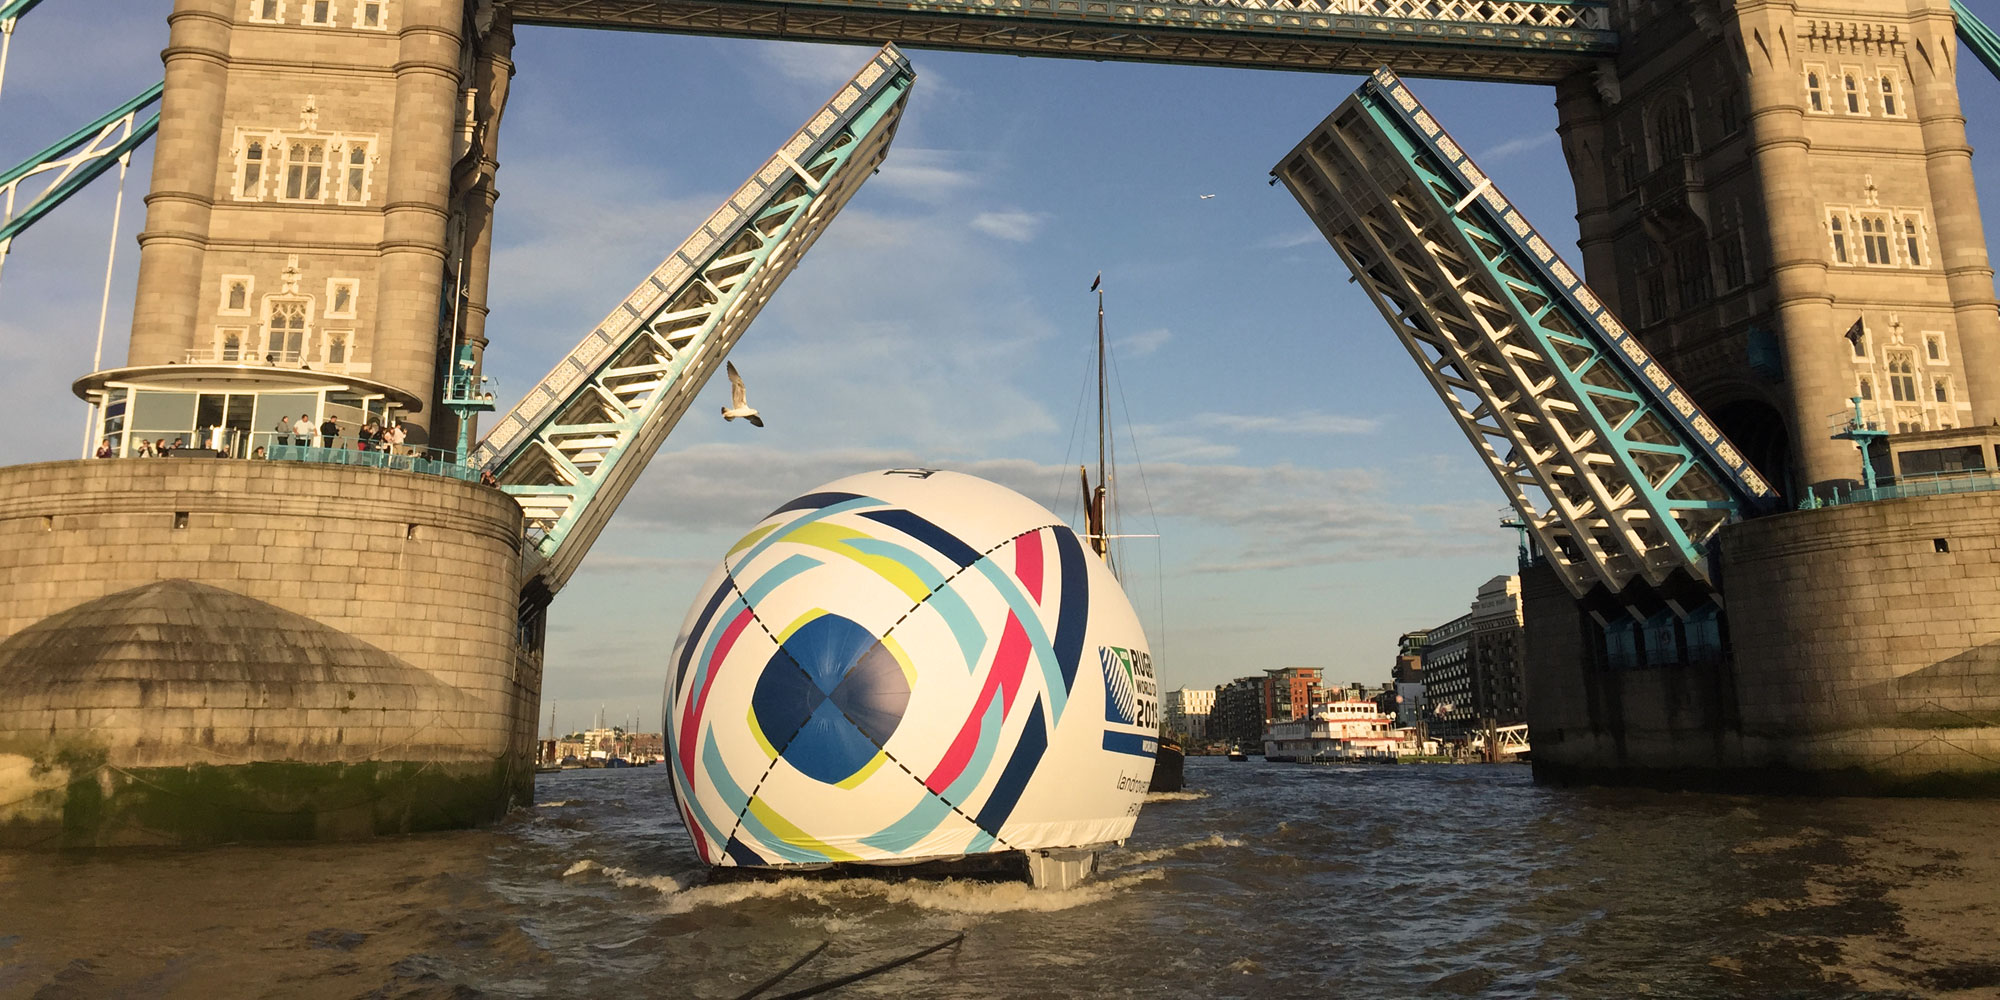 Need to reveal a car from a Rugby Ball on the Thames?